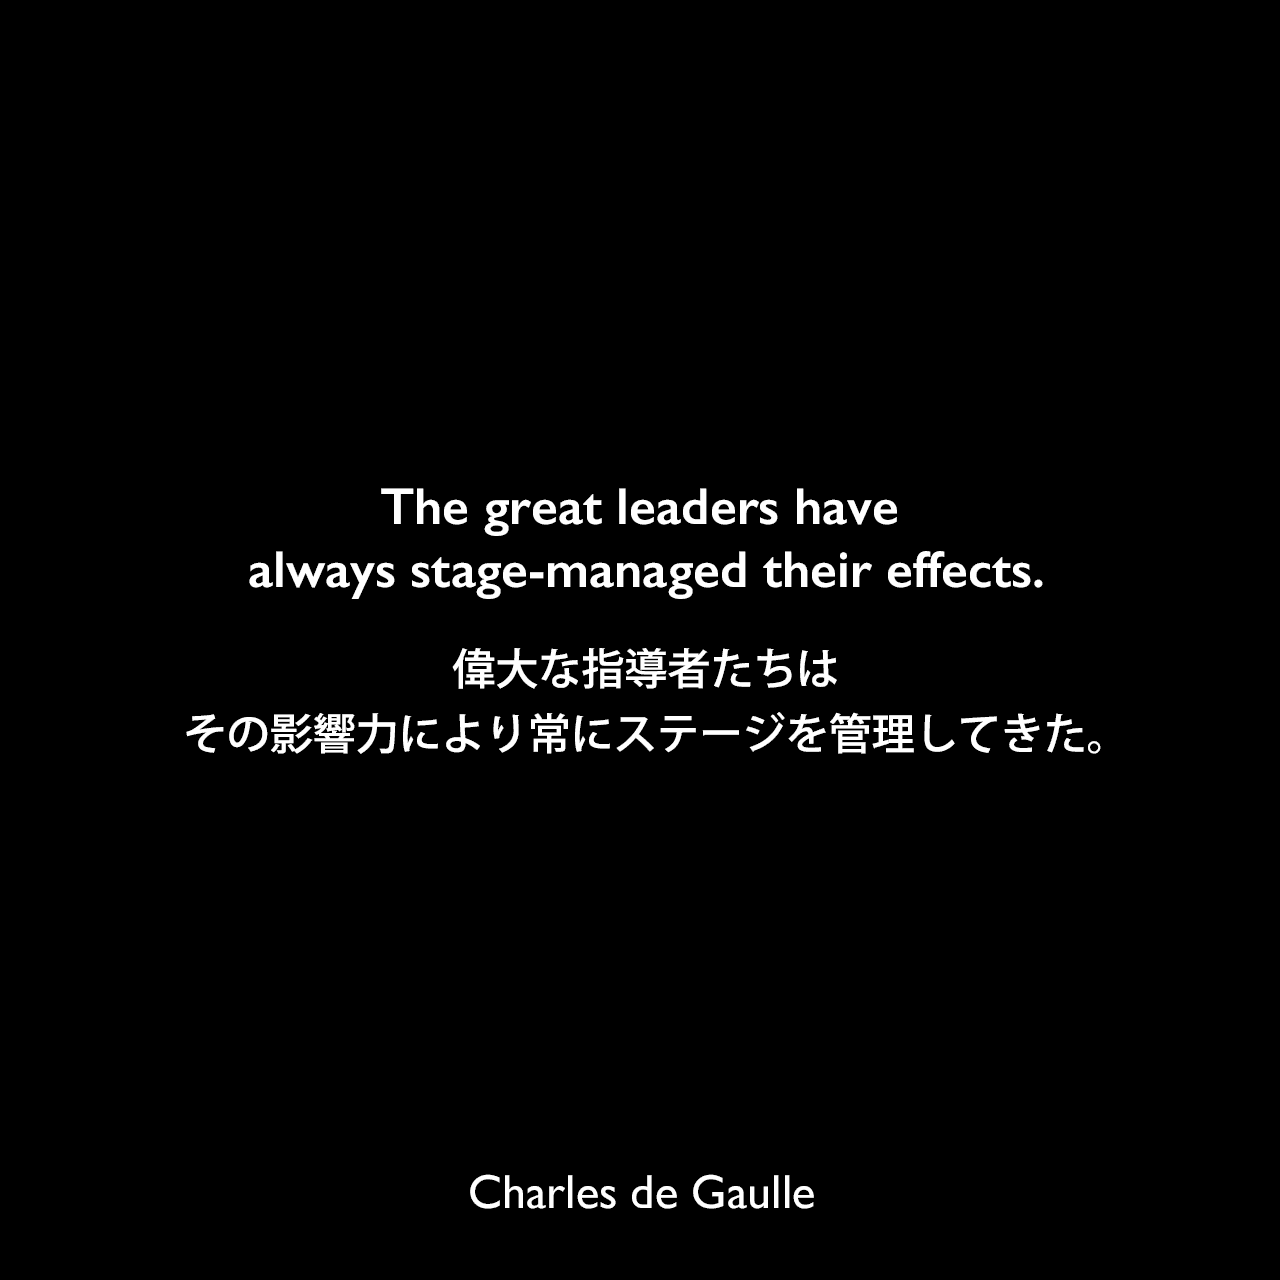 The great leaders have always stage-managed their effects.偉大な指導者たちは、その影響力により常にステージを管理してきた。Charles de Gaulle